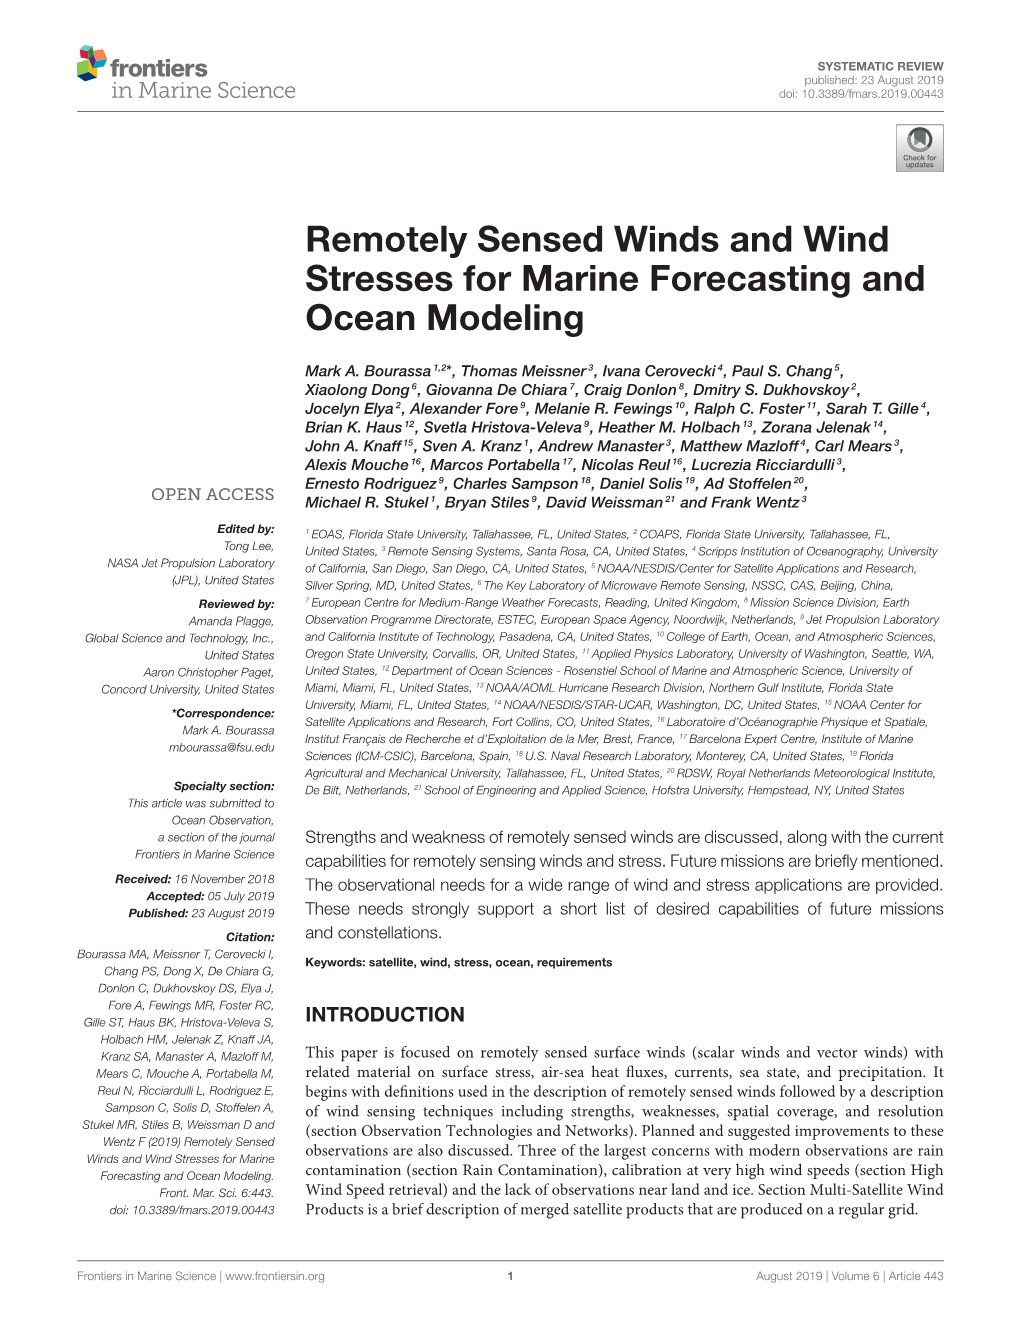 Remotely Sensed Winds and Wind Stresses for Marine Forecasting and Ocean Modeling